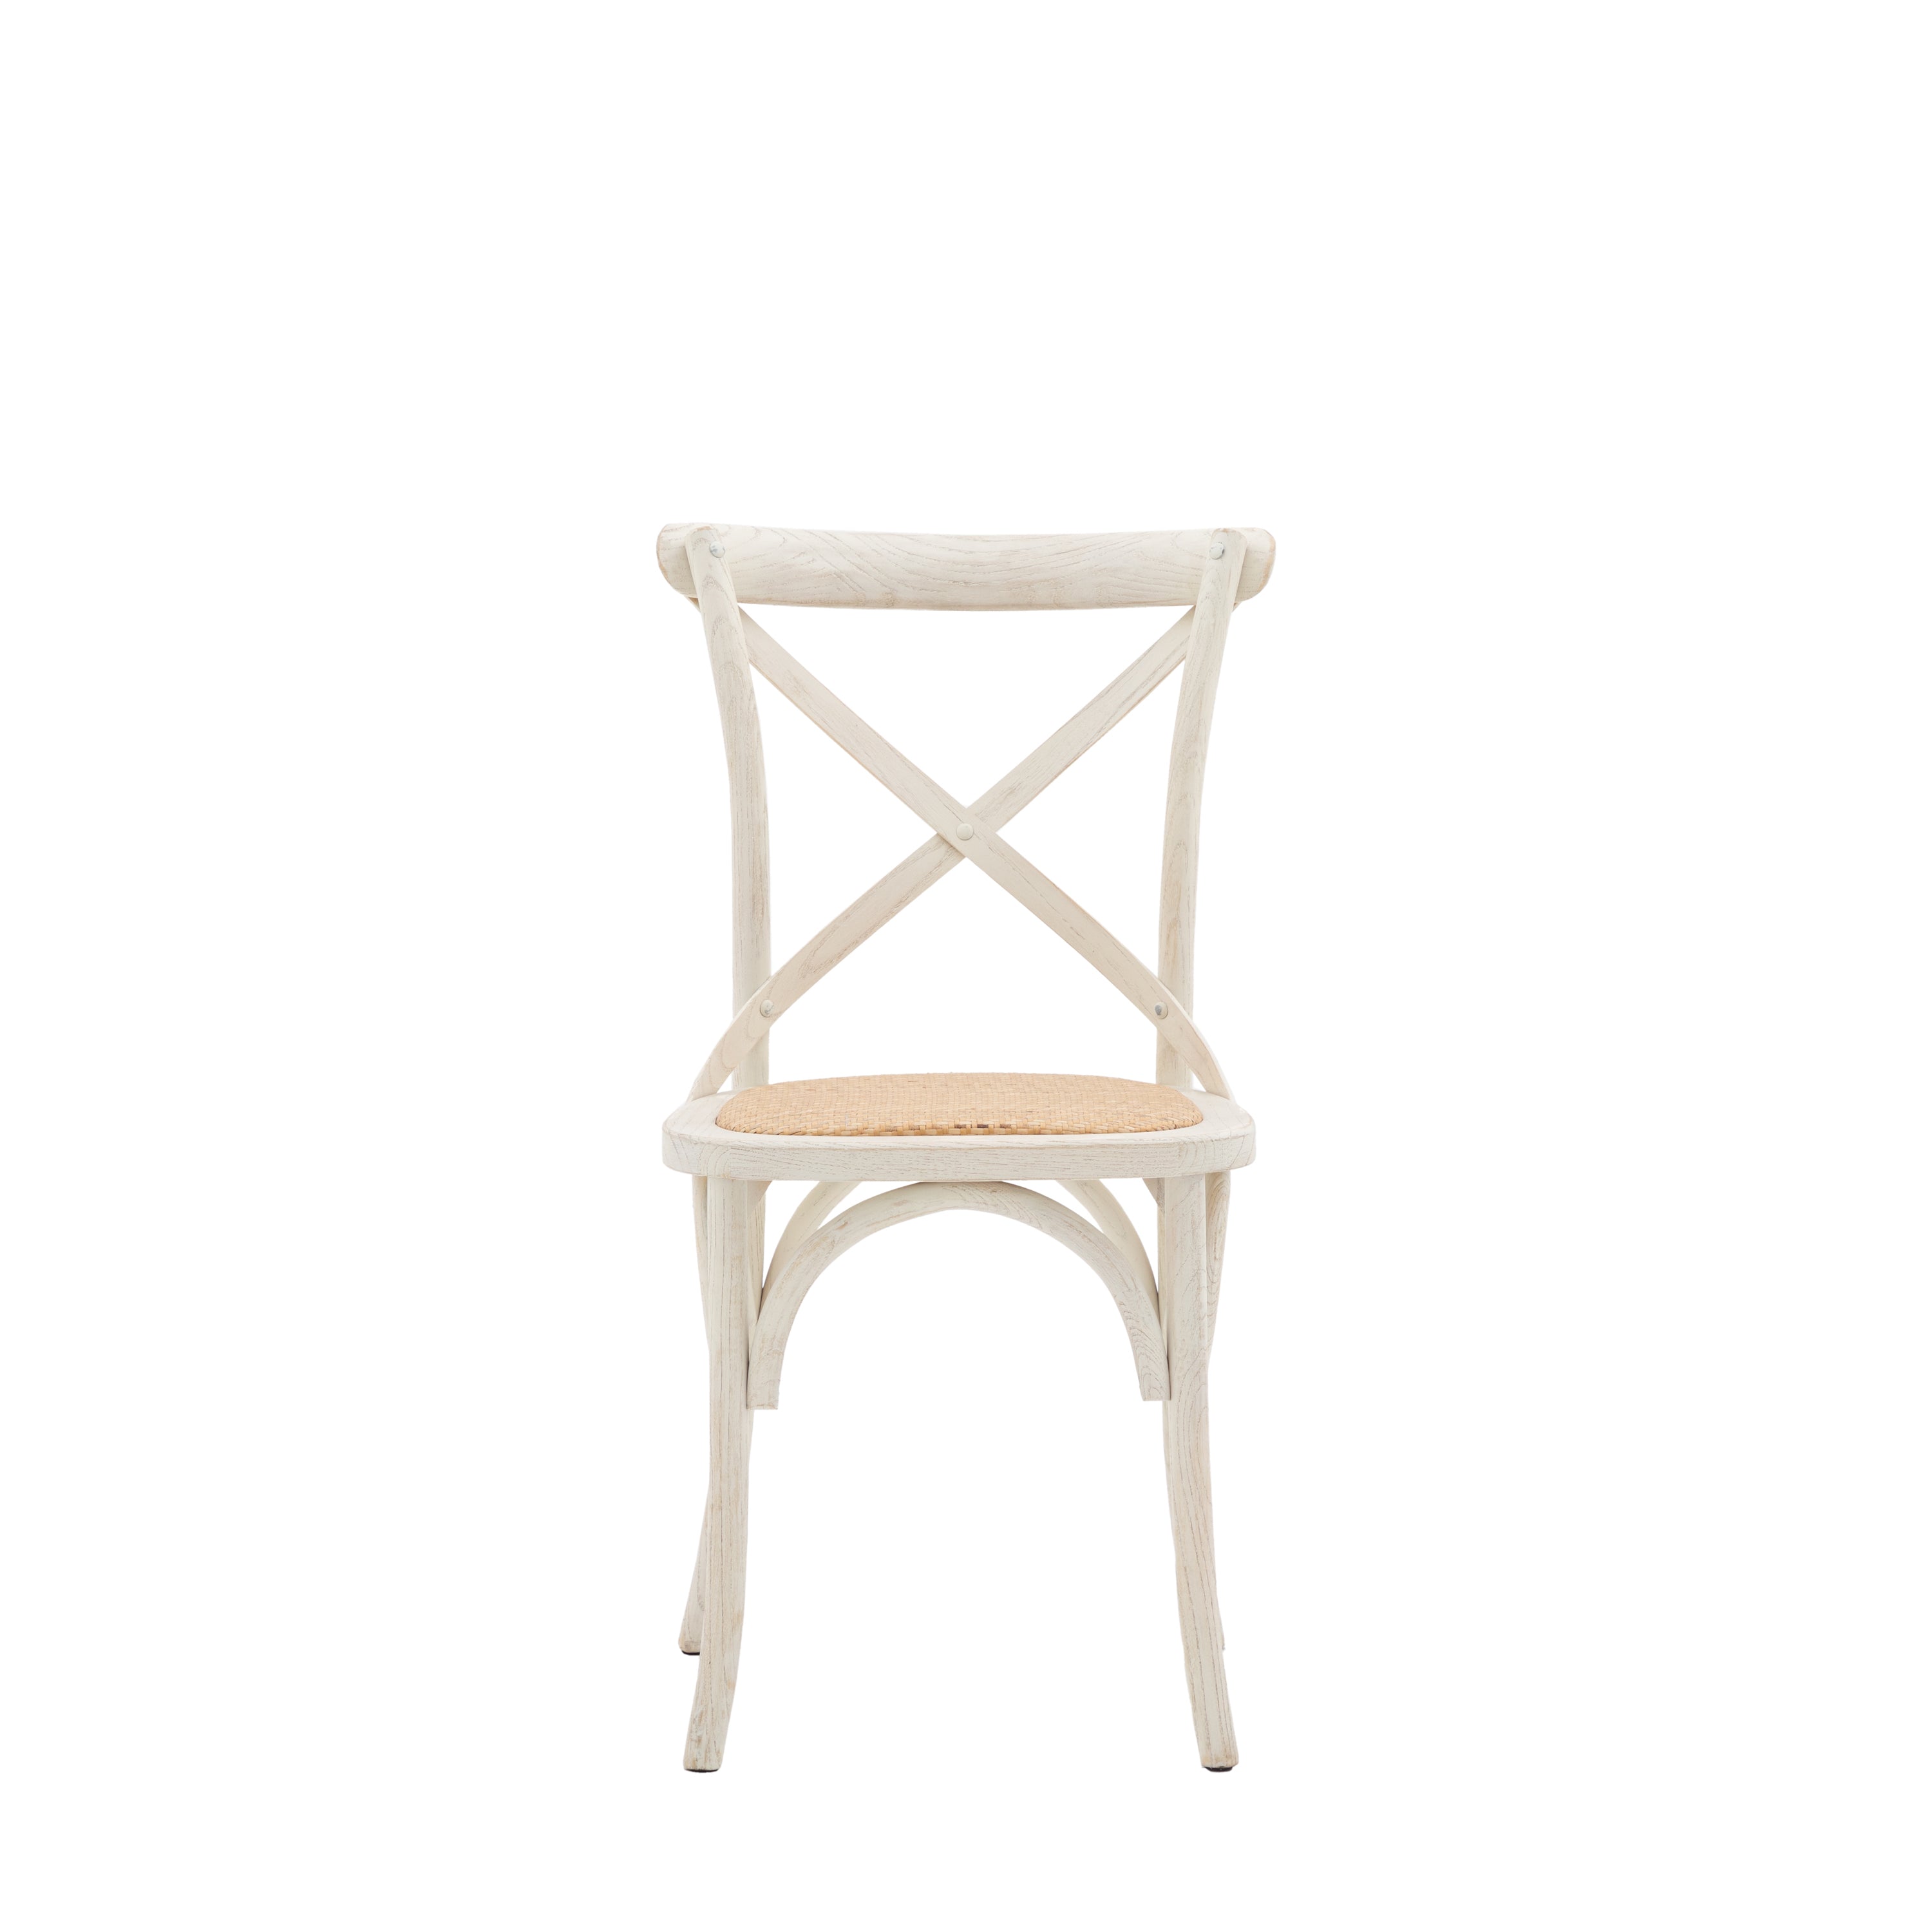 Caffe Chair White Rattan Set of 2